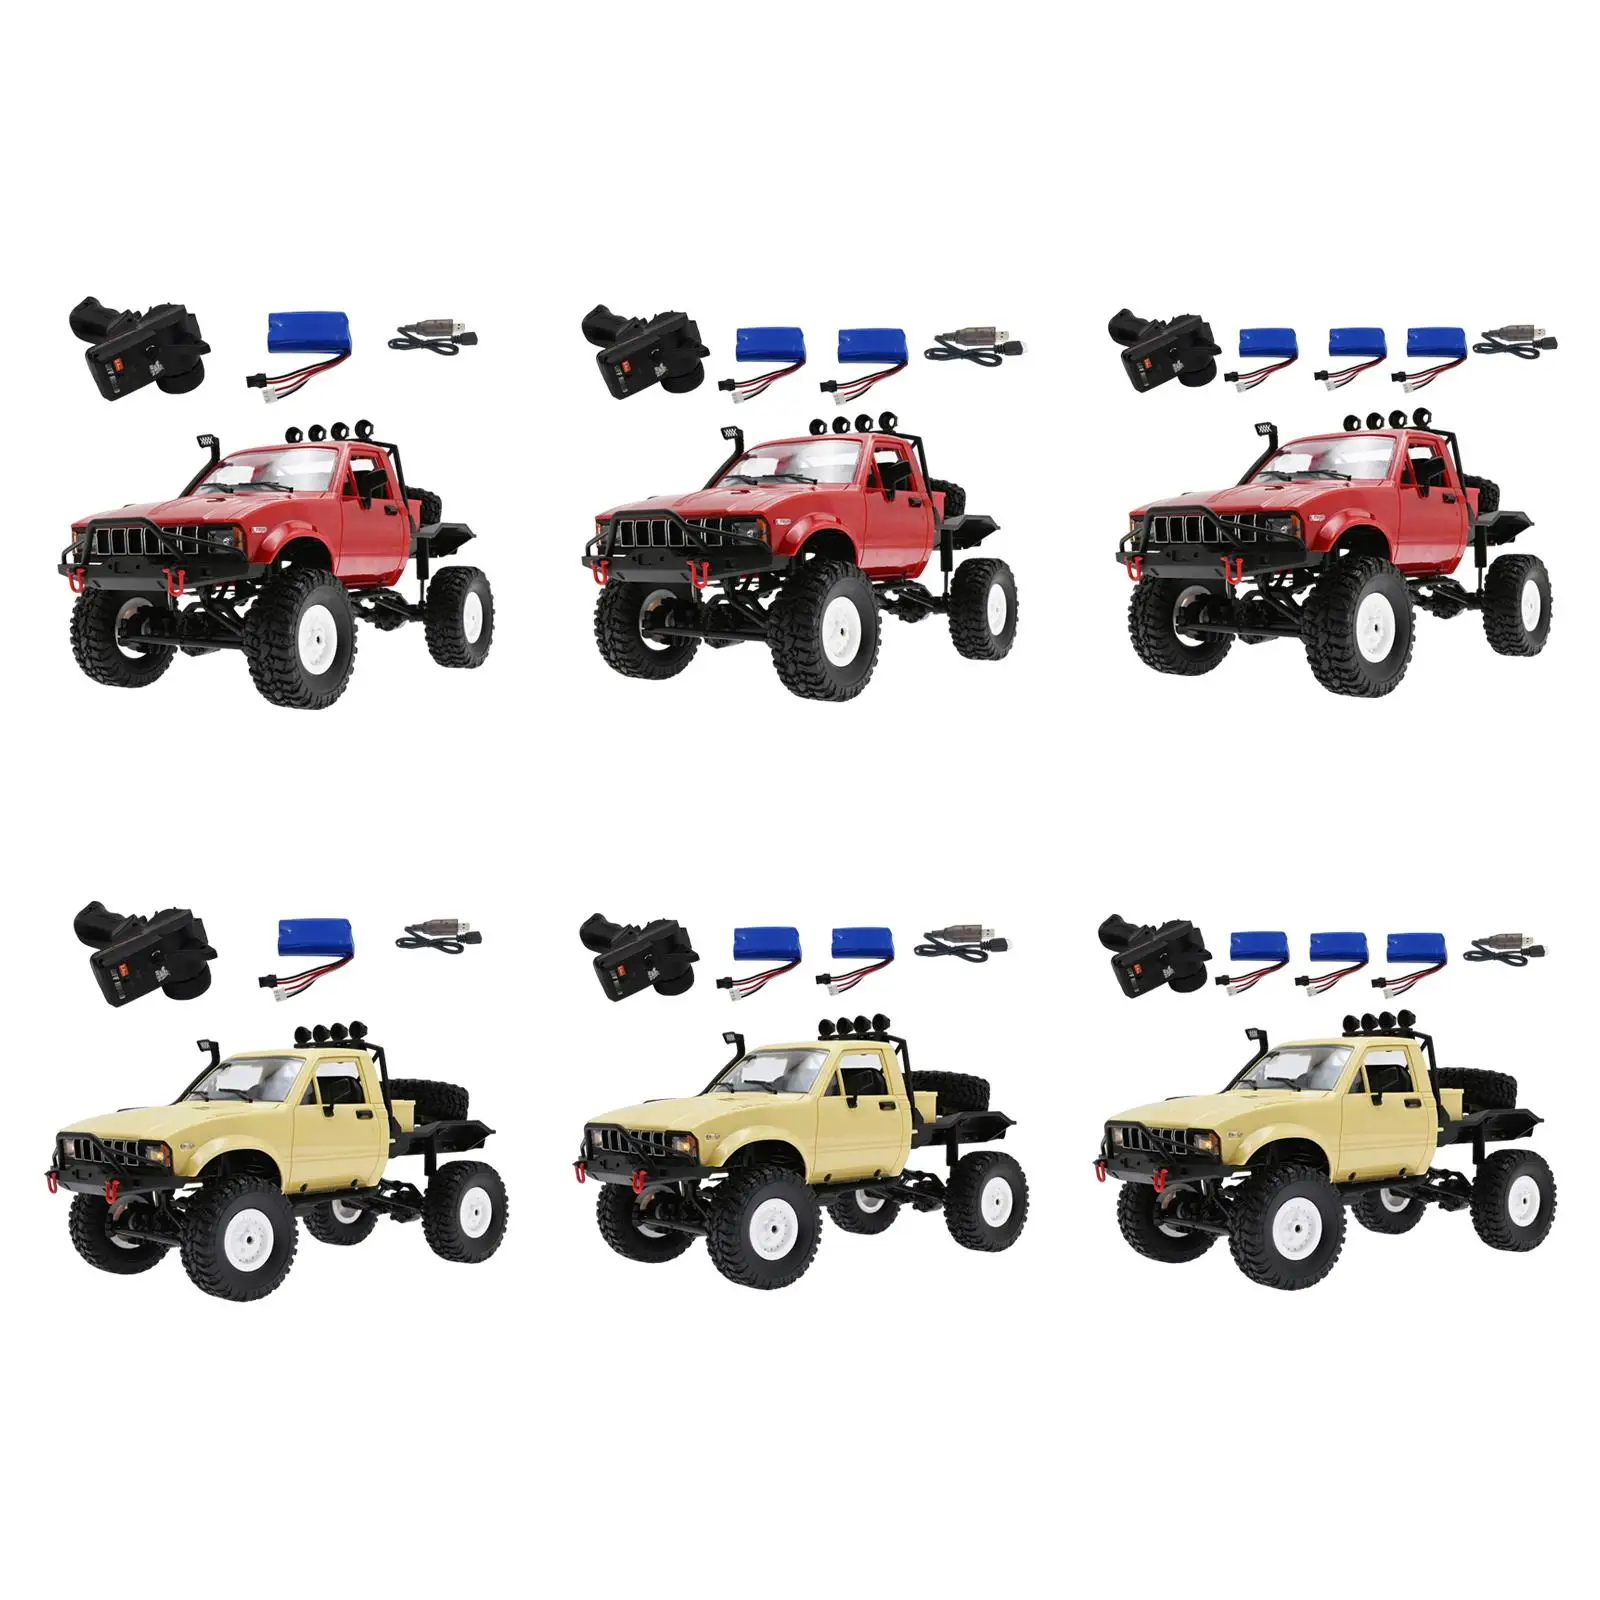 

1/16 Scale RC Truck C14 RC Rock Crawler 4WD 2.4GHz 4CH Remote Control Car for WPL Racing Vehicle Semi Truck Trailer Toy